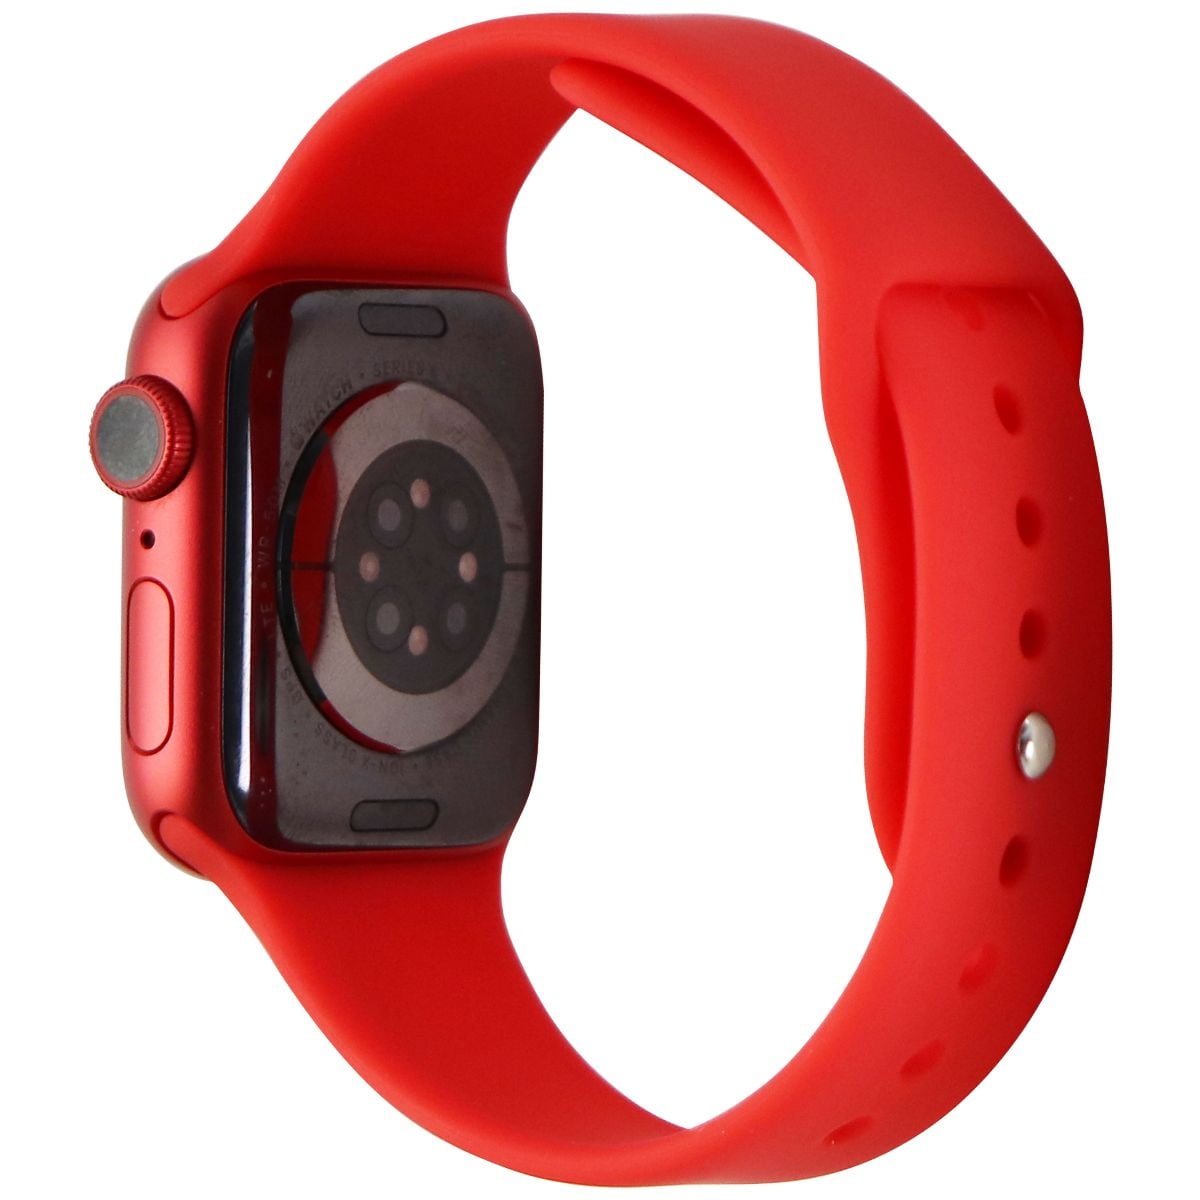 Apple Watch Series 6 A2293 GPS + LTE 40mm Product (RED) Alu/Red Sp Band  GRADE A (Used) - Walmart.com